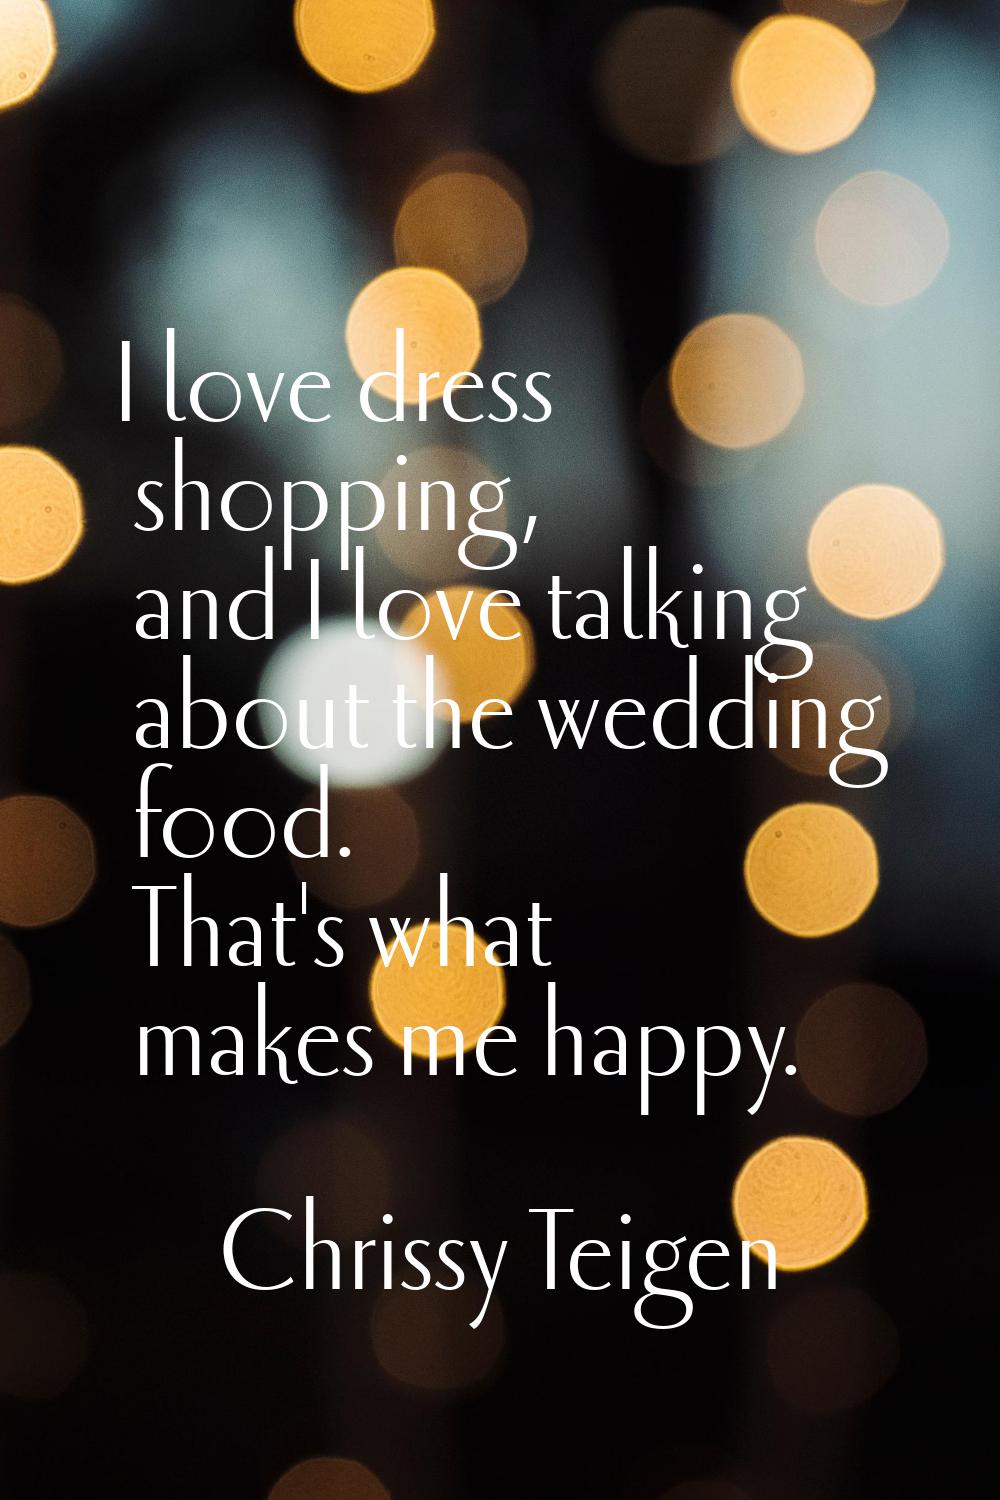 I love dress shopping, and I love talking about the wedding food. That's what makes me happy.